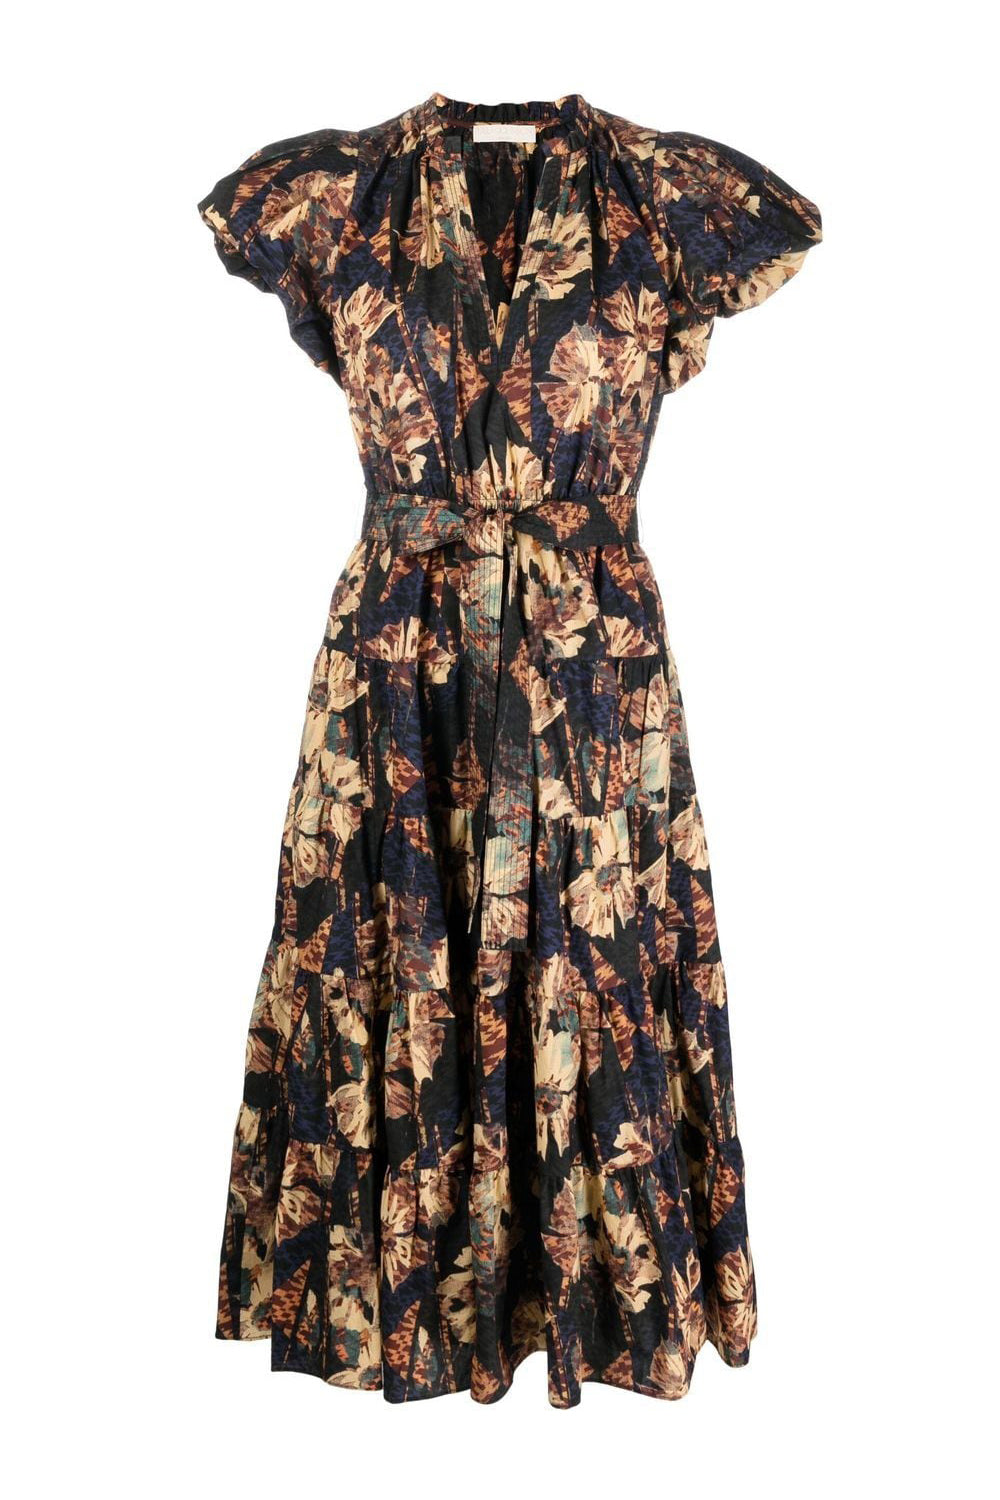 Ottilie abstract-print dress, lupine